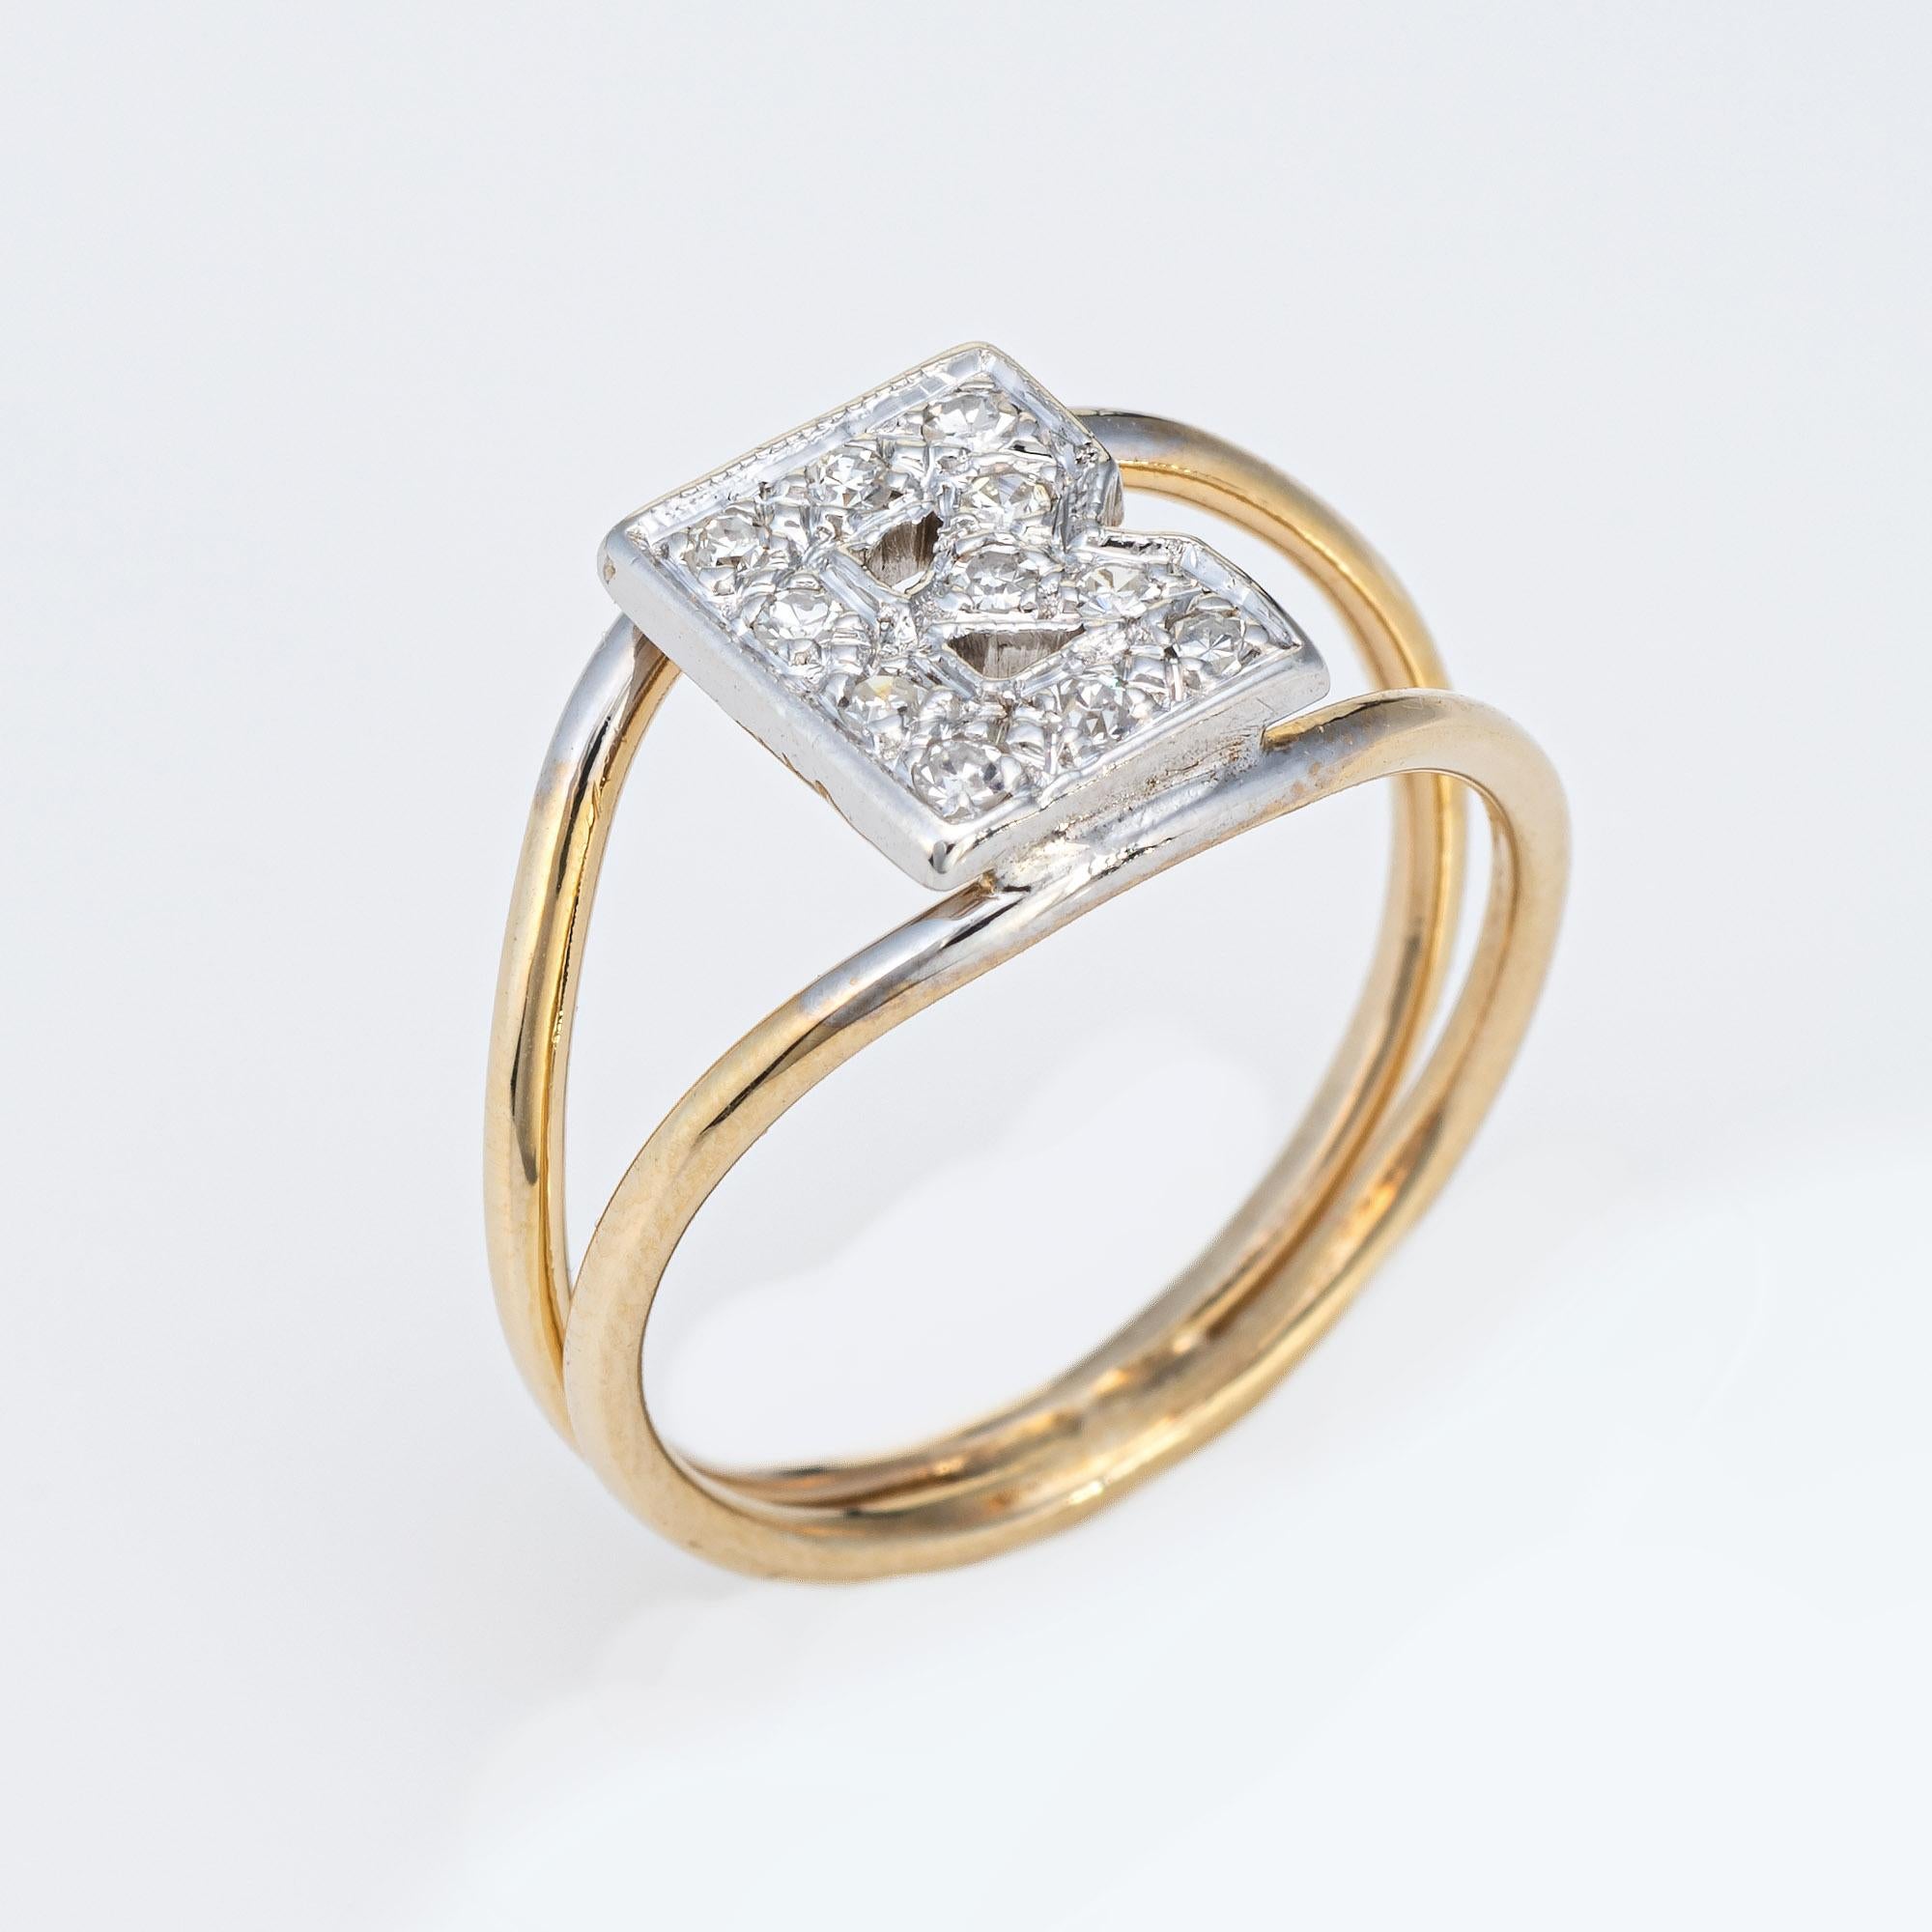 Stylish vintage letter 'B' diamods ring (circa 1970s) crafted in 14 karat yellow gold. 

11 single cut diamonds total an estimated 0.05 carats (estimated at H-I color and VS2-SI2 clarity).  

The diamond set letter 'B' sits upon a split shank band.